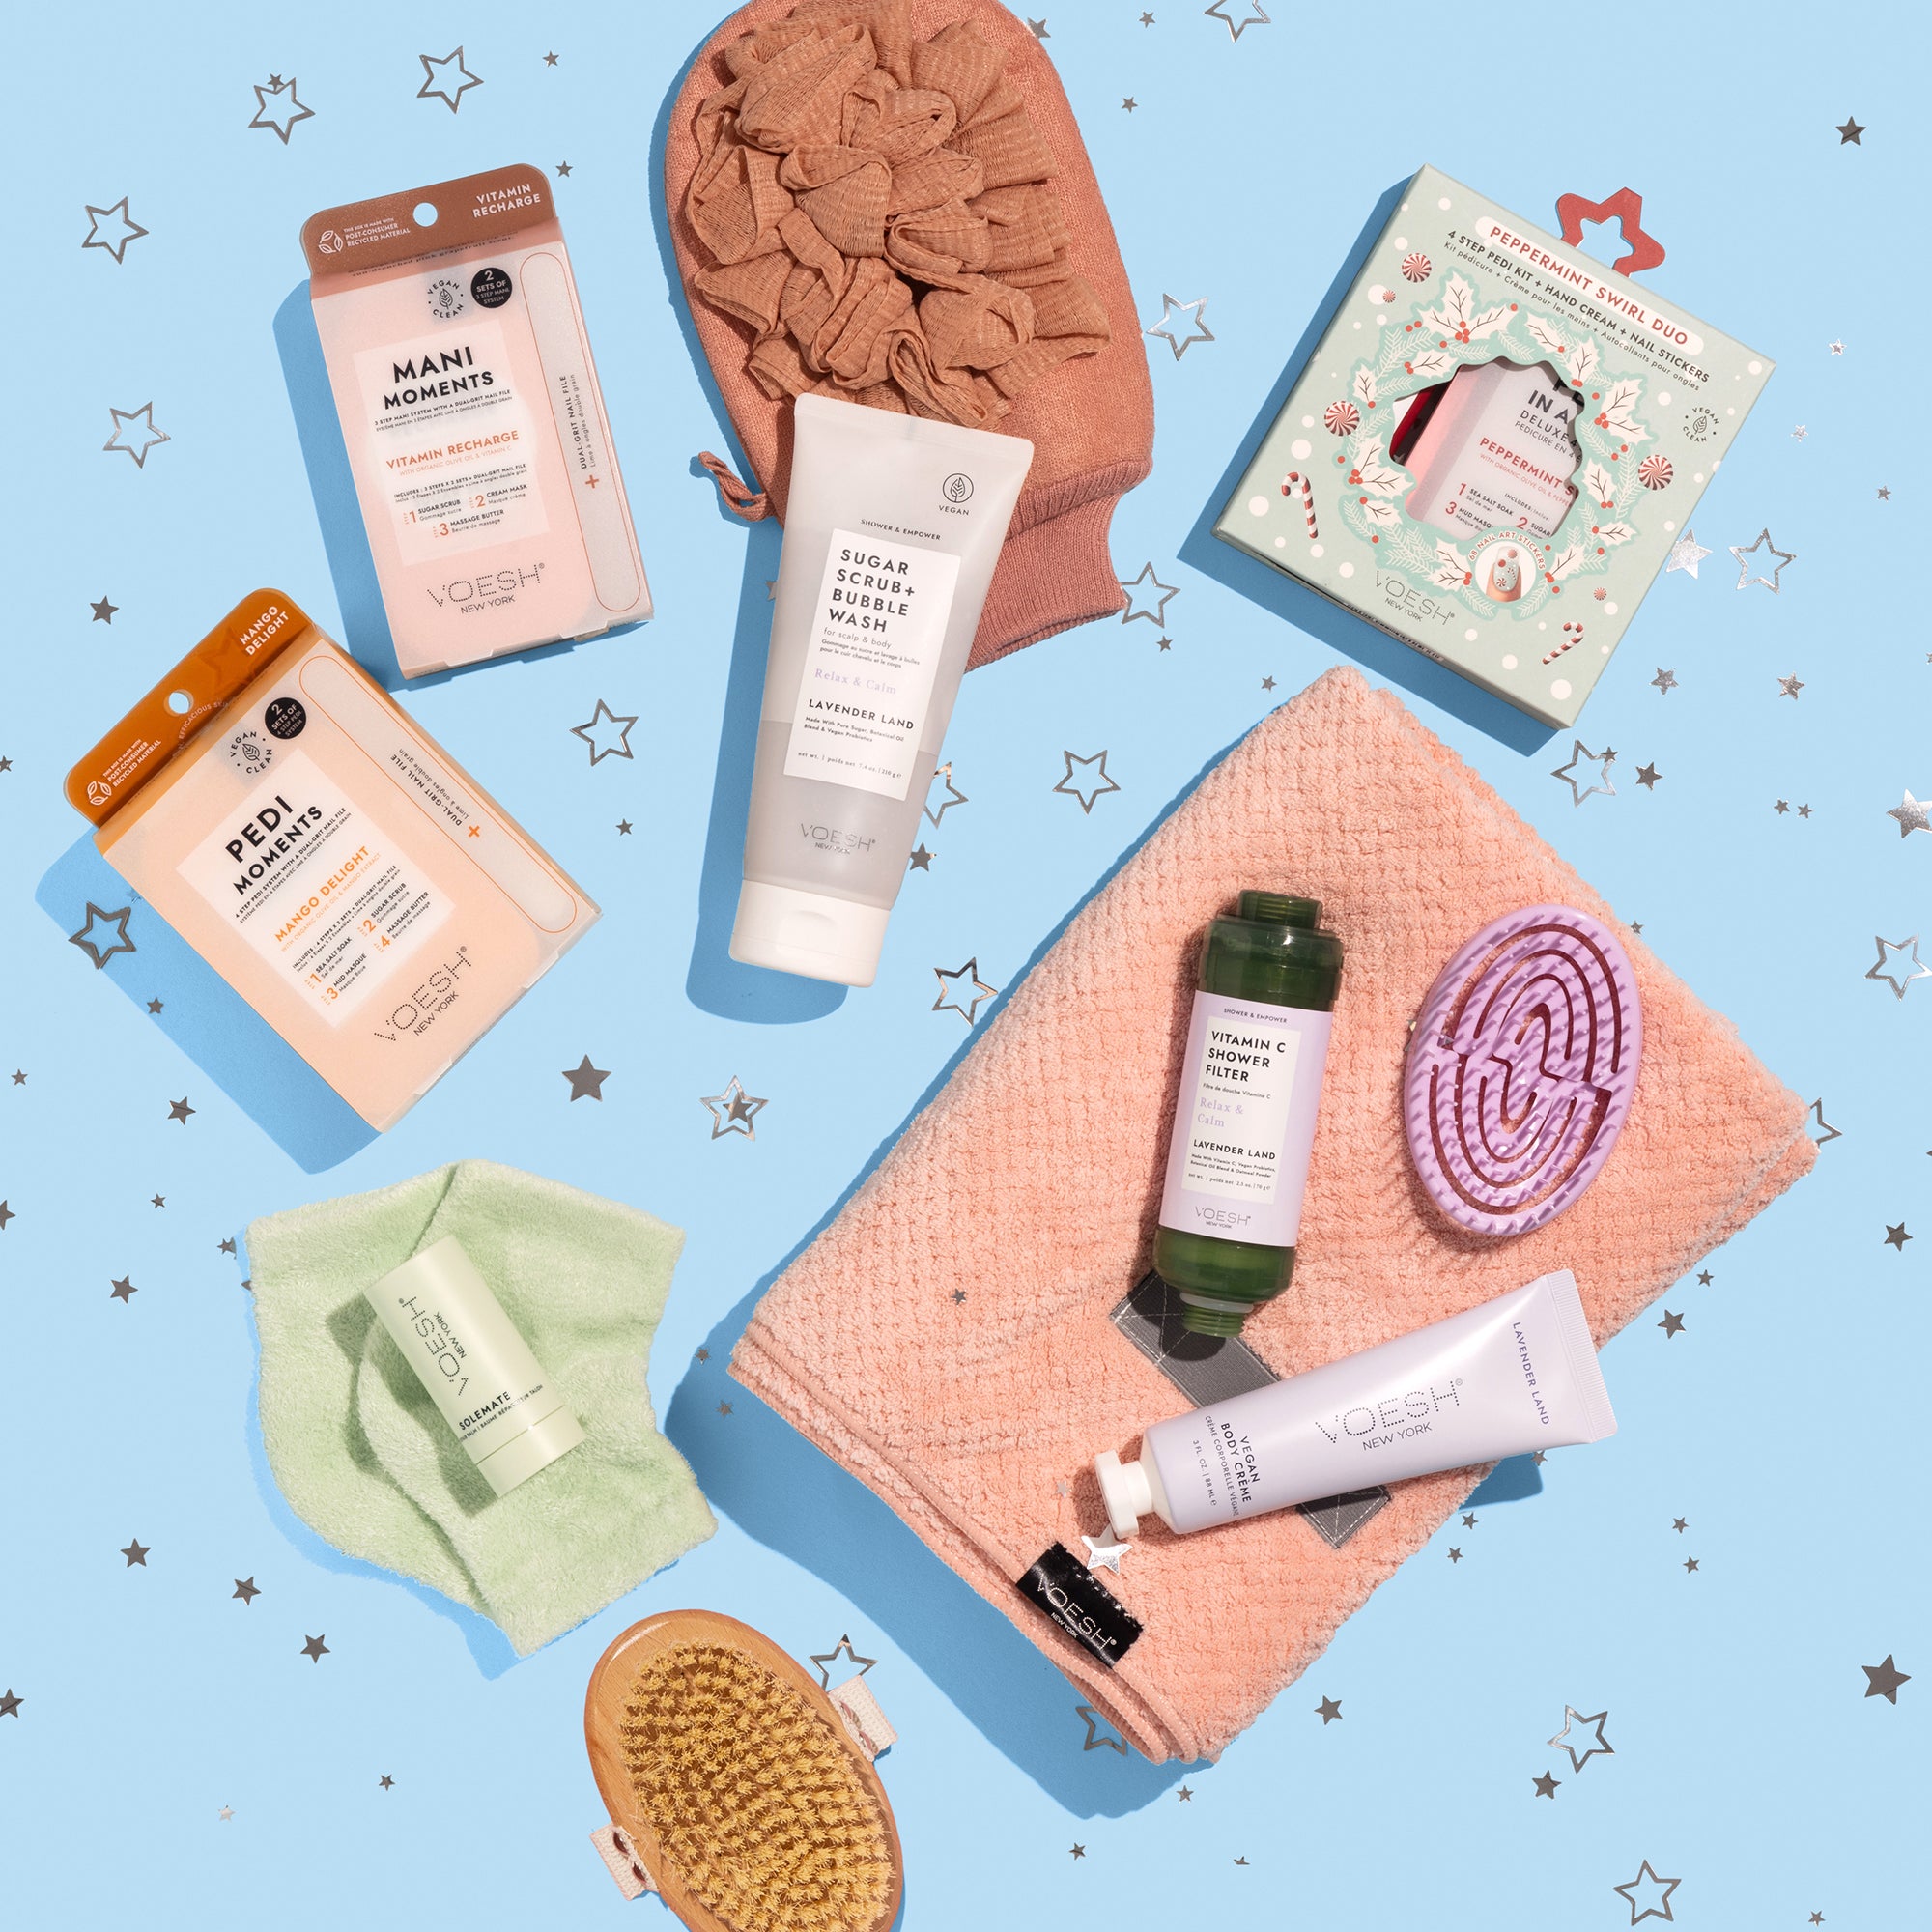 Best of VOESH Holiday skincare set featuring Mani Moments, Pedi Moments, Shower & Empower Duo, Peppermint Swirl Duo, and shower care accessories.